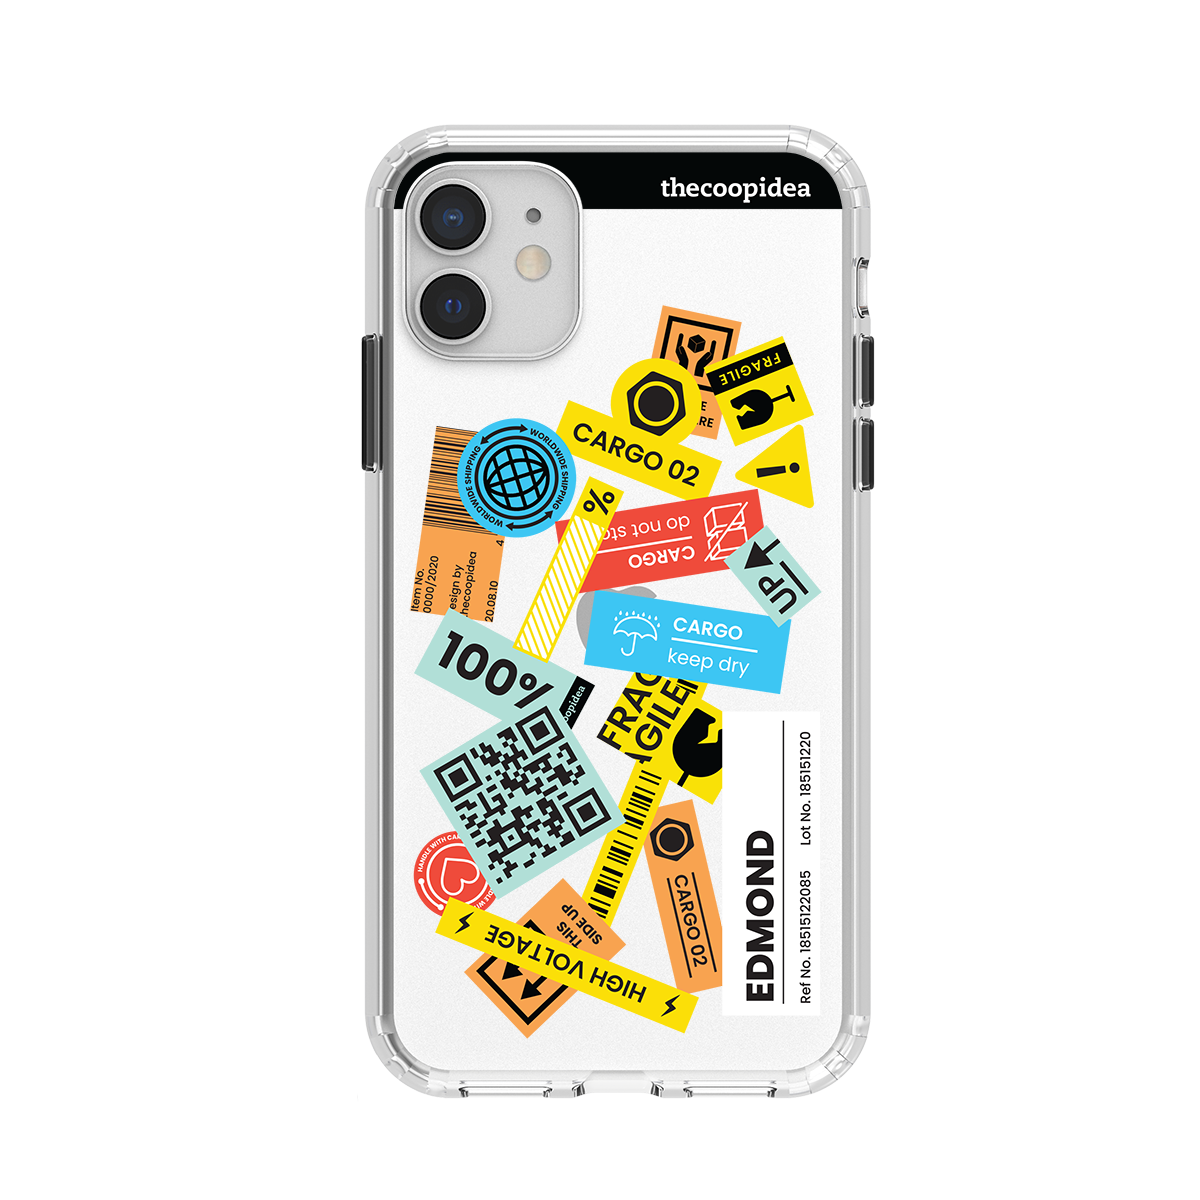 Customize CANVAS iPhone 11 Case - Collage